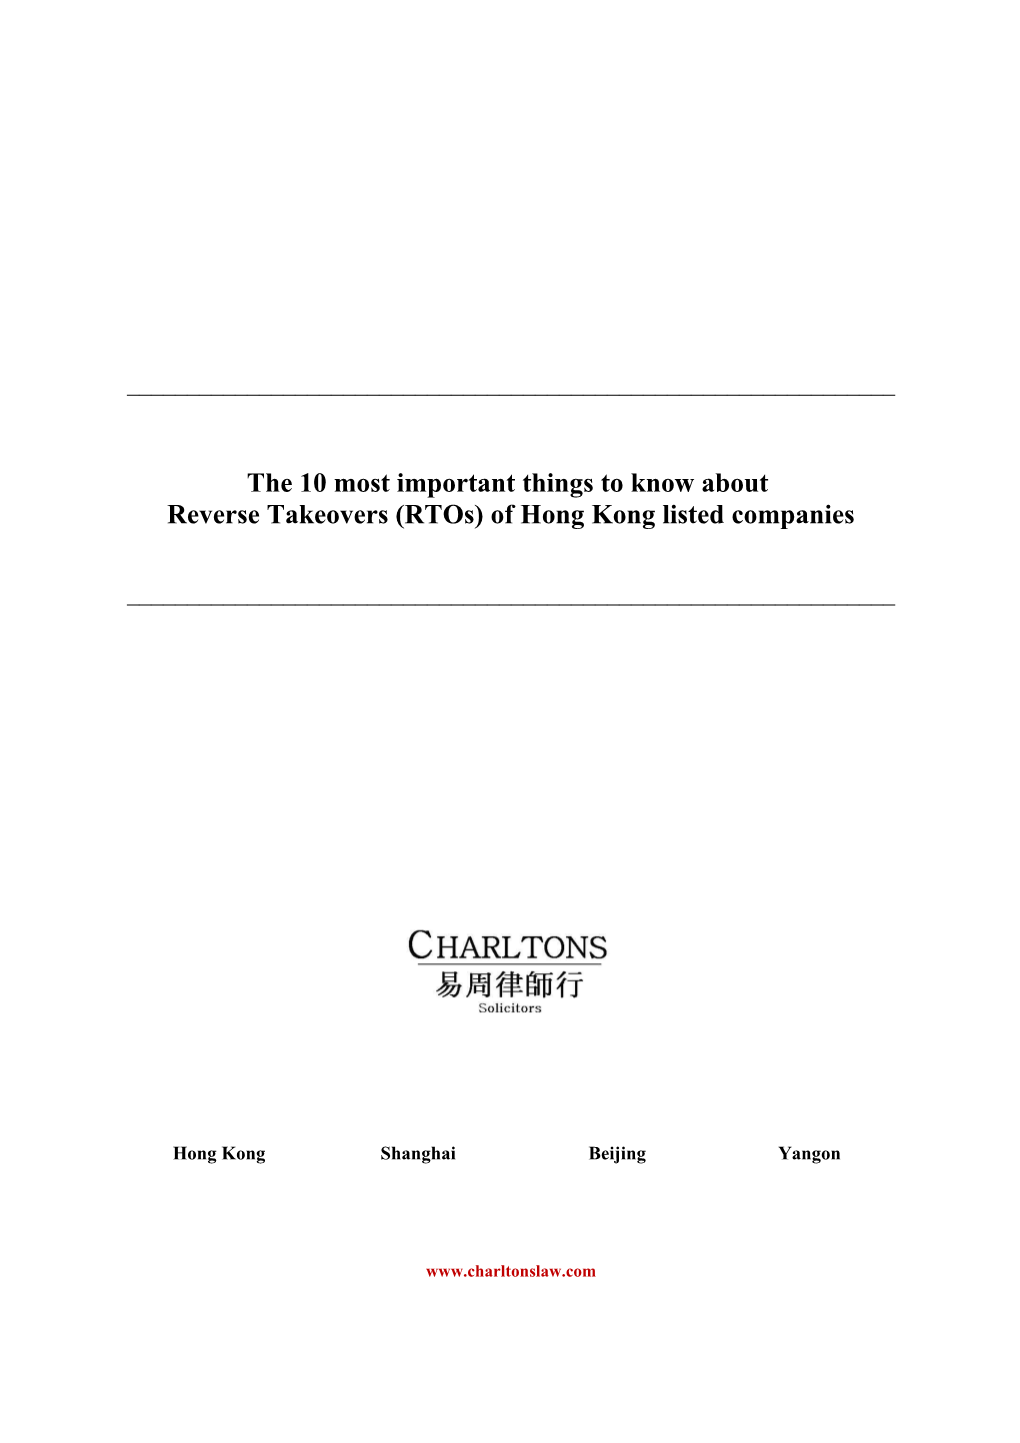 The 10 Most Important Things to Know About Reverse Takeovers (Rtos) of HK Listed Companies